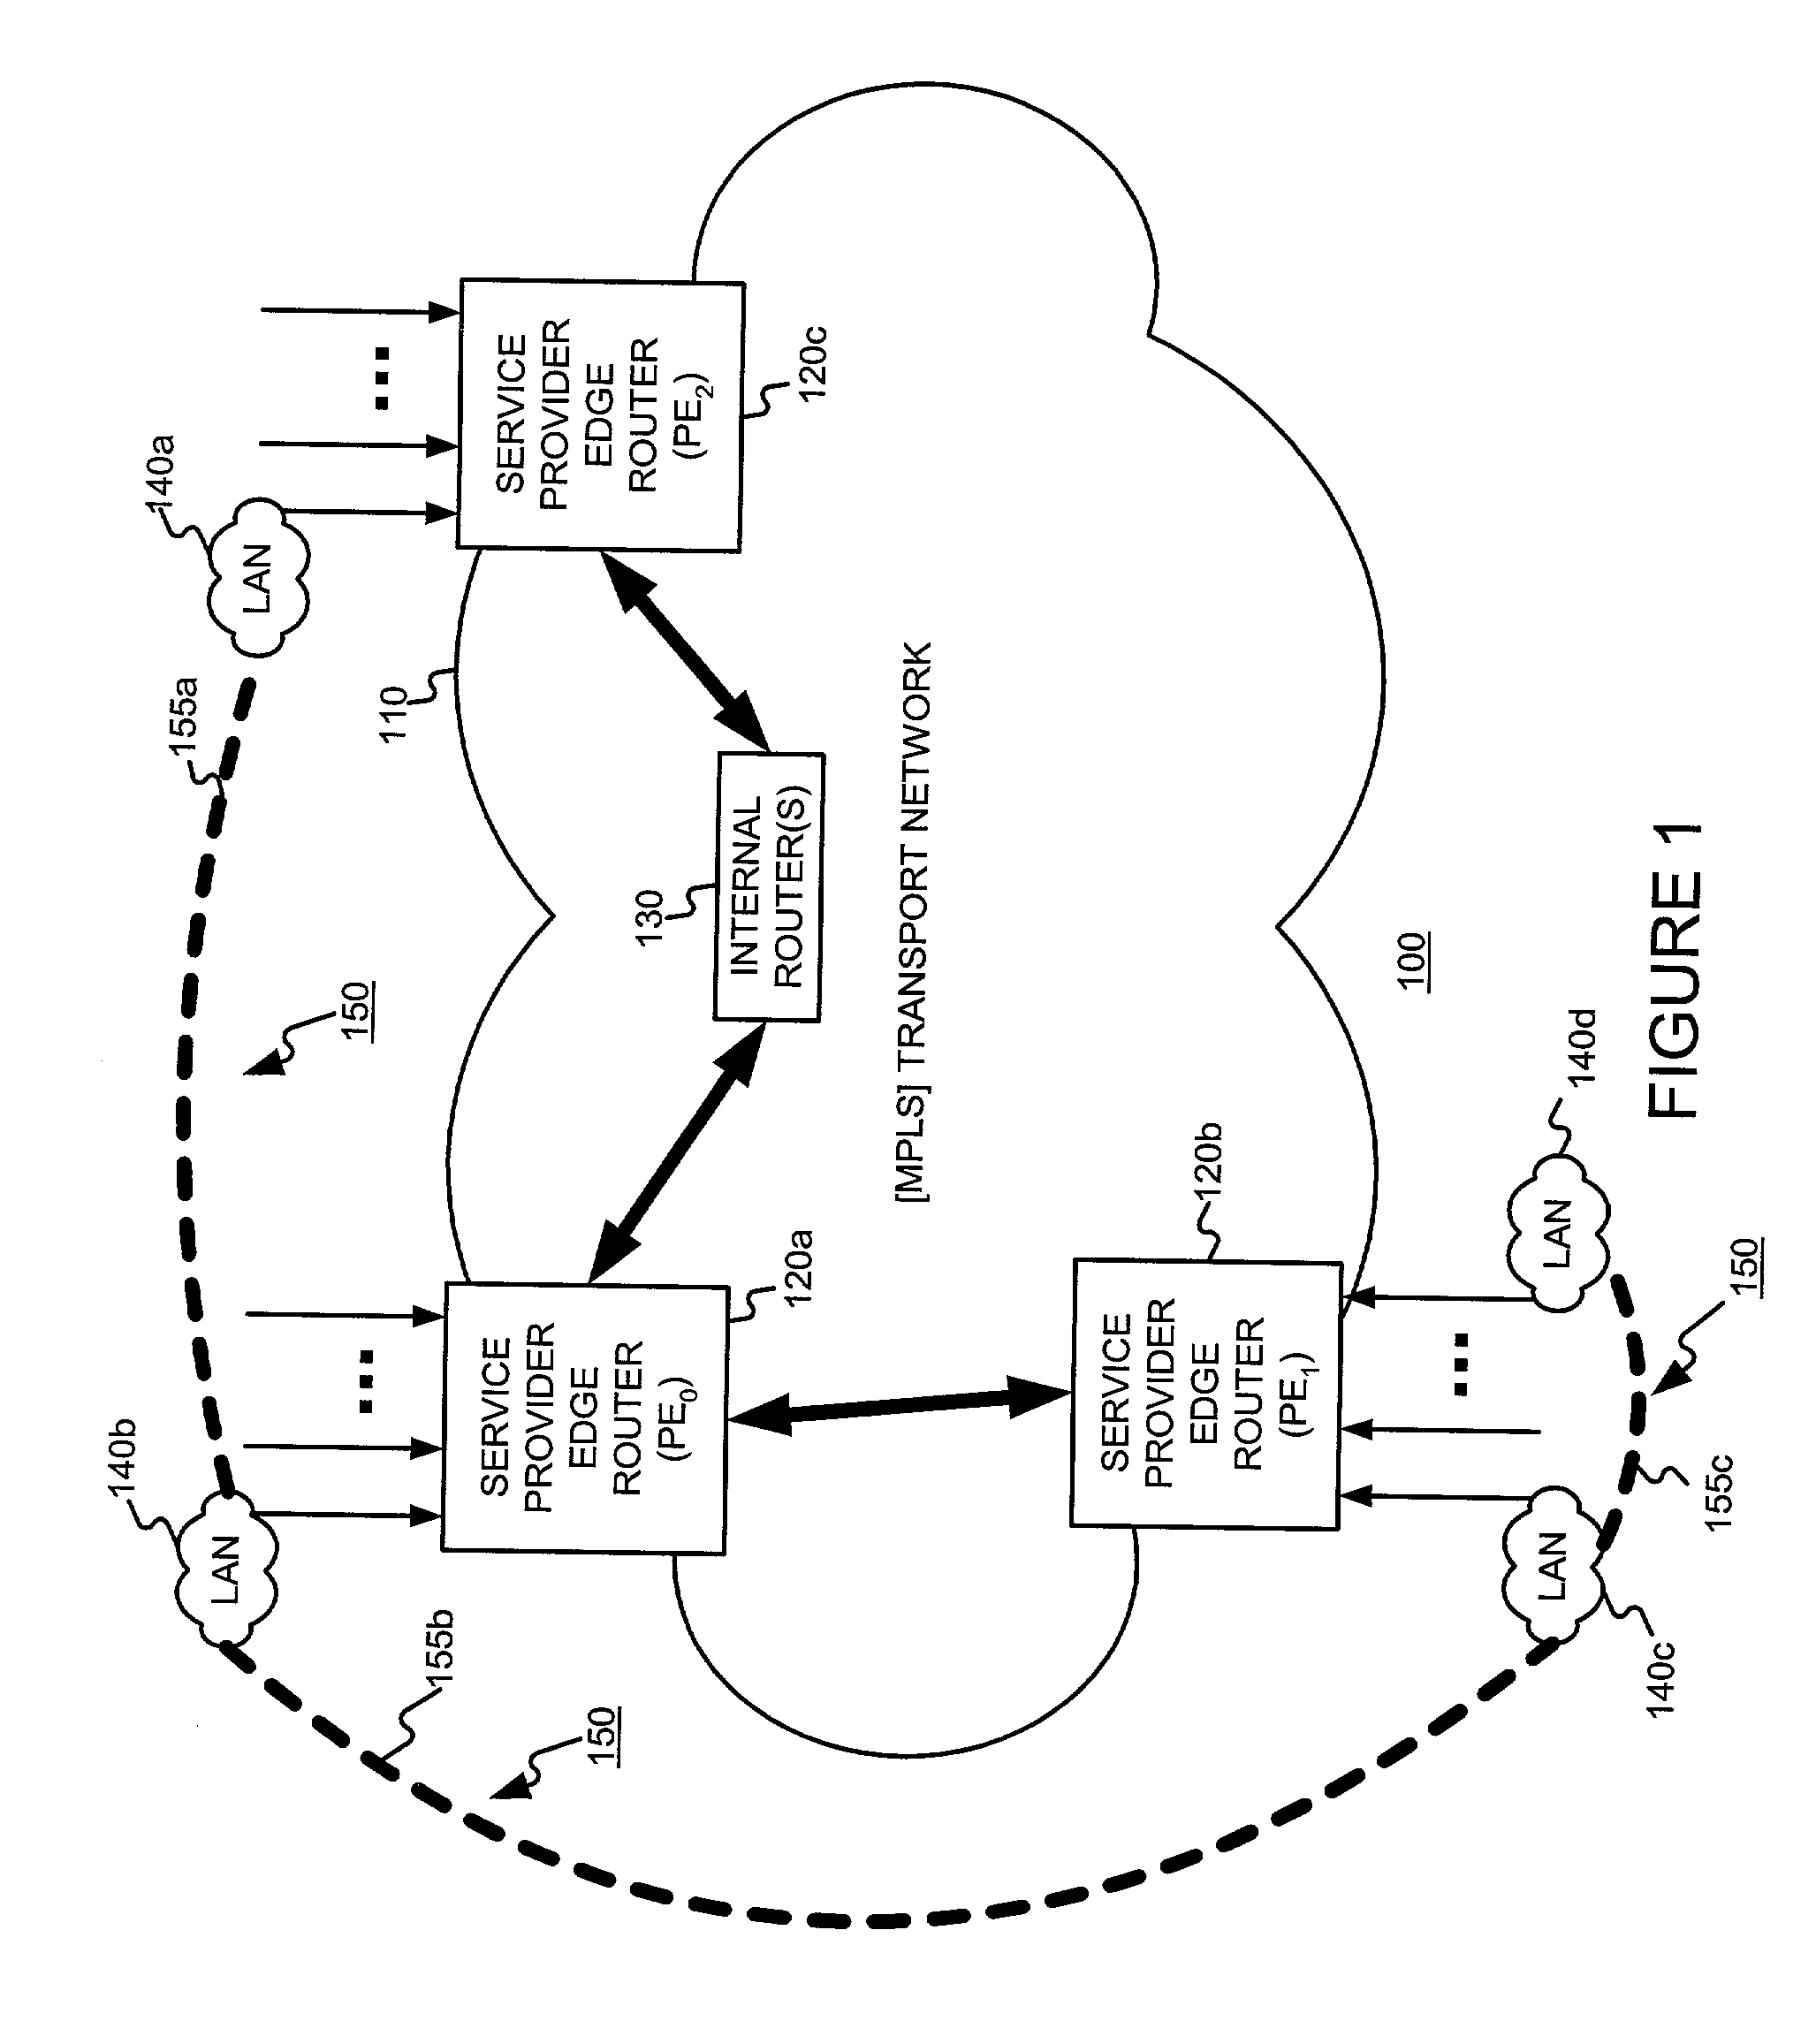 Edge devices for providing a transparent LAN segment service and configuring such edge devices